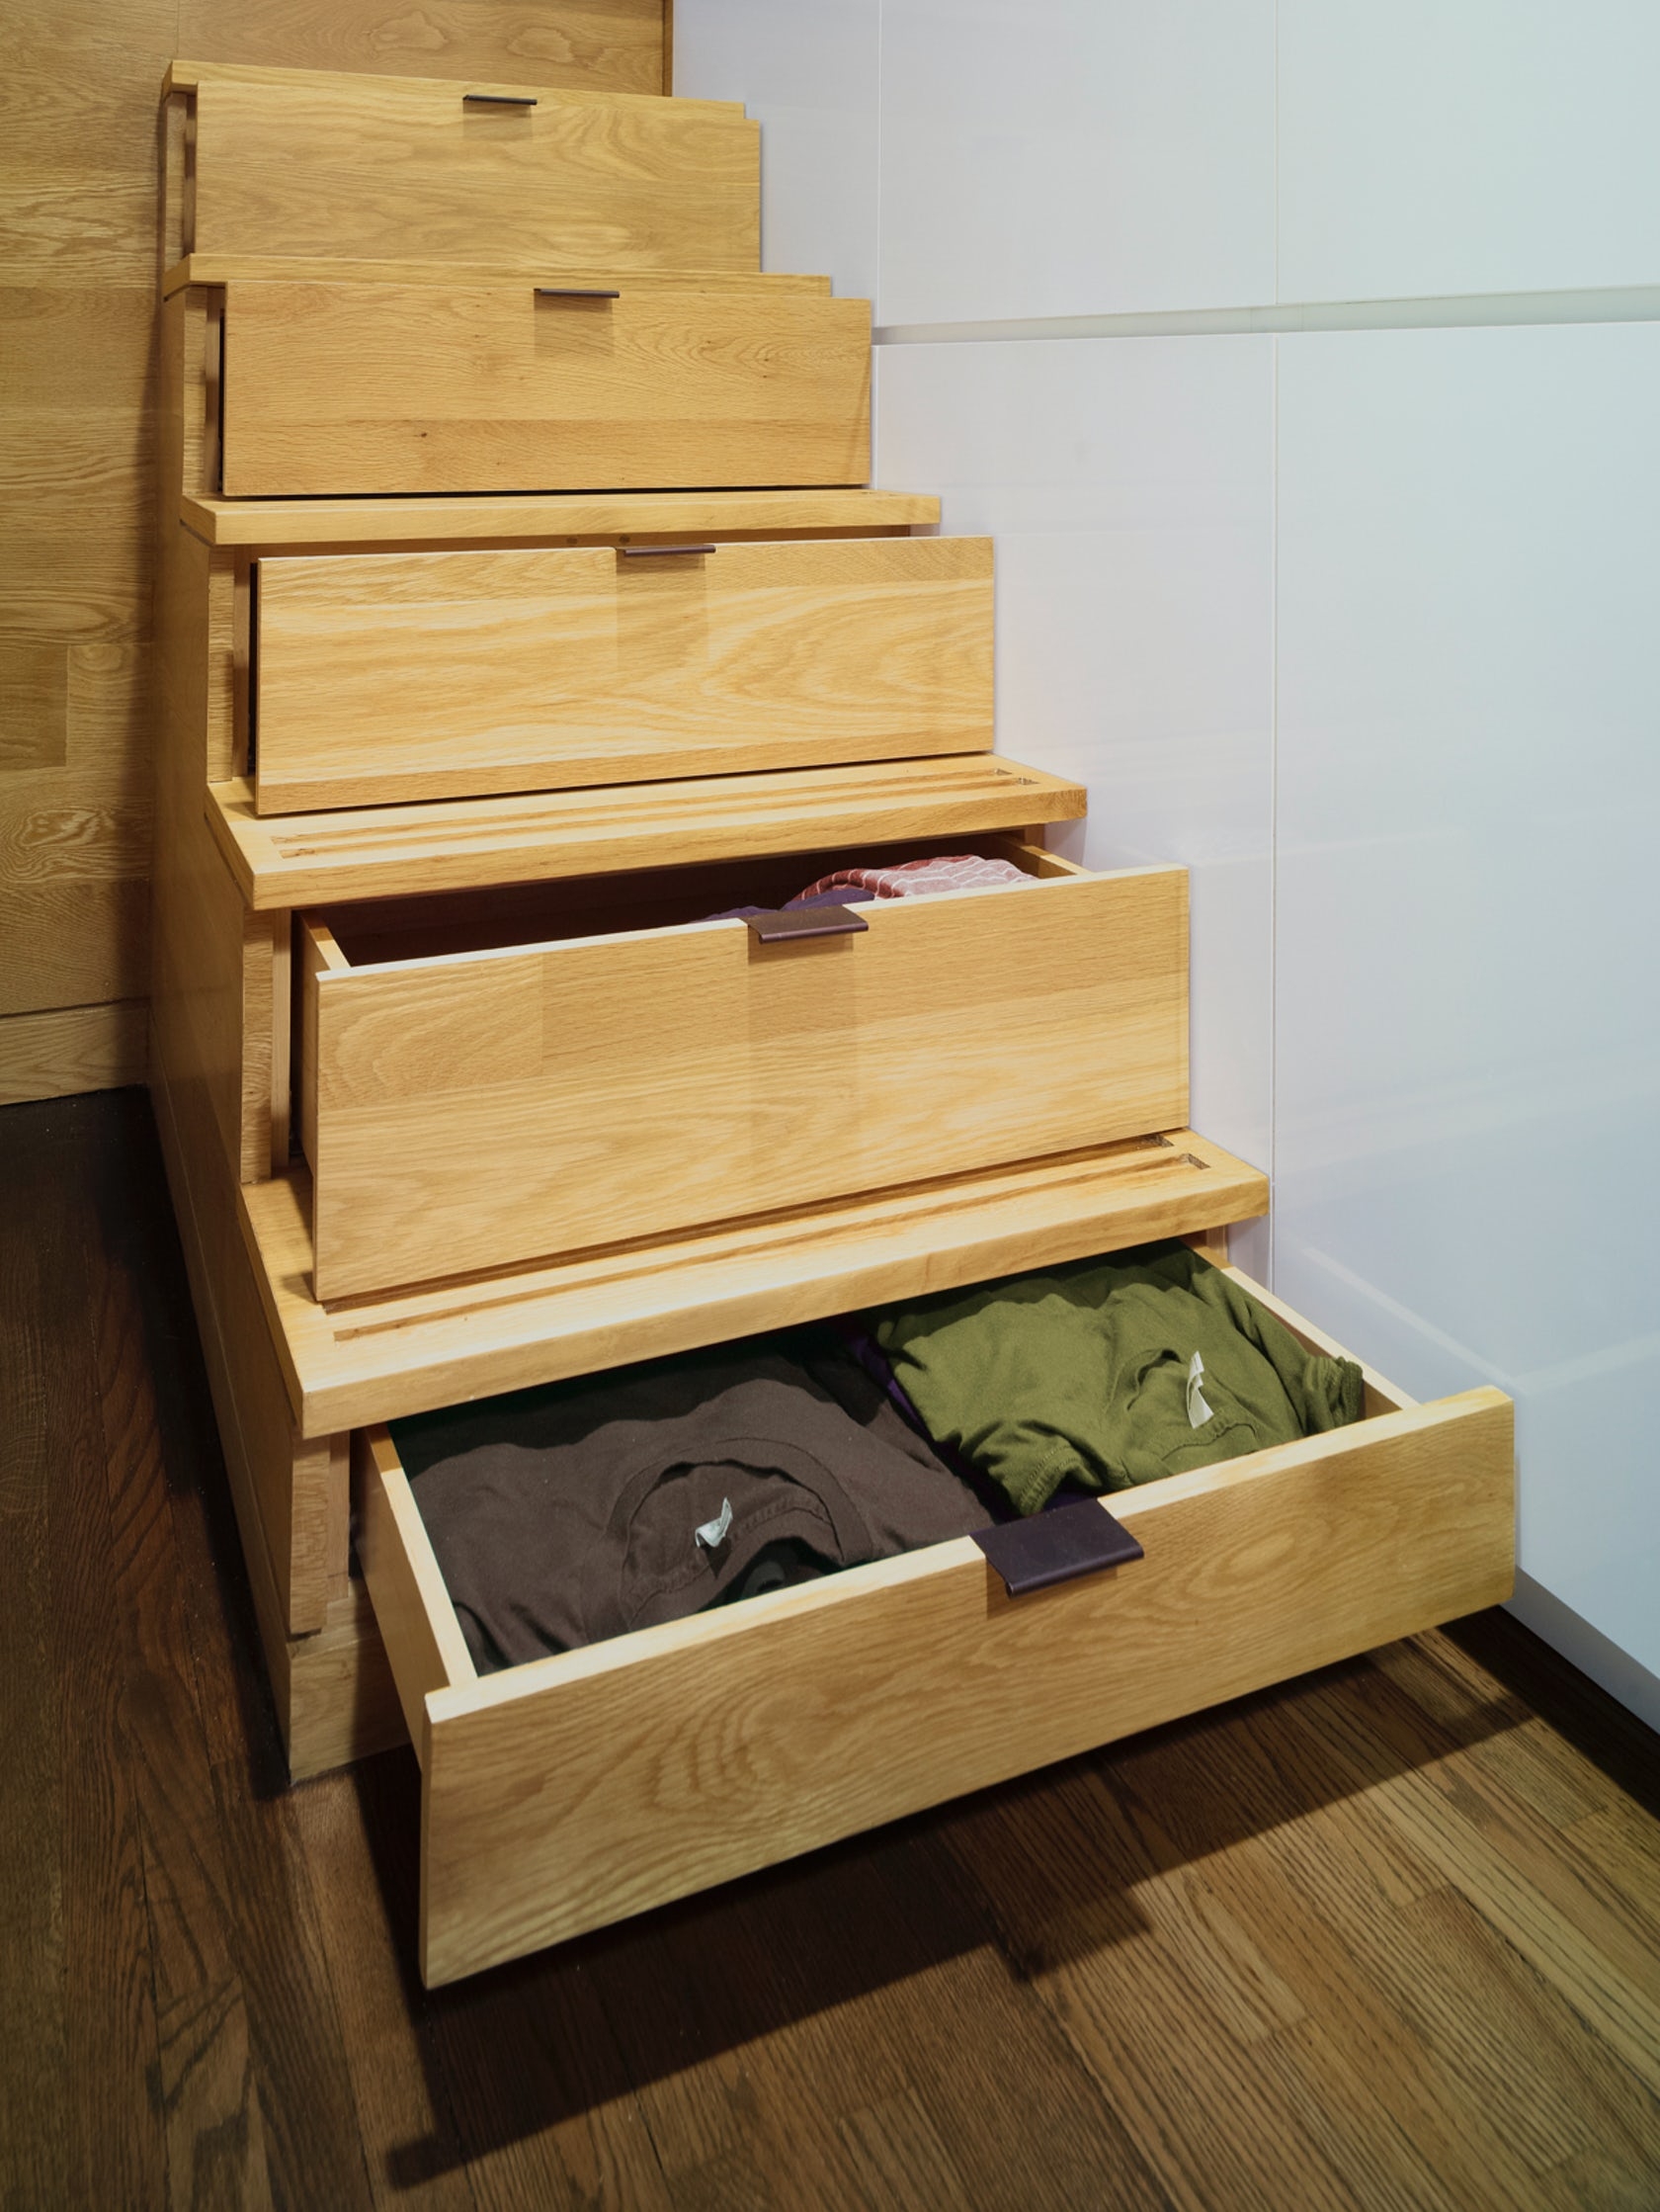 stairs with drawers for loft bed